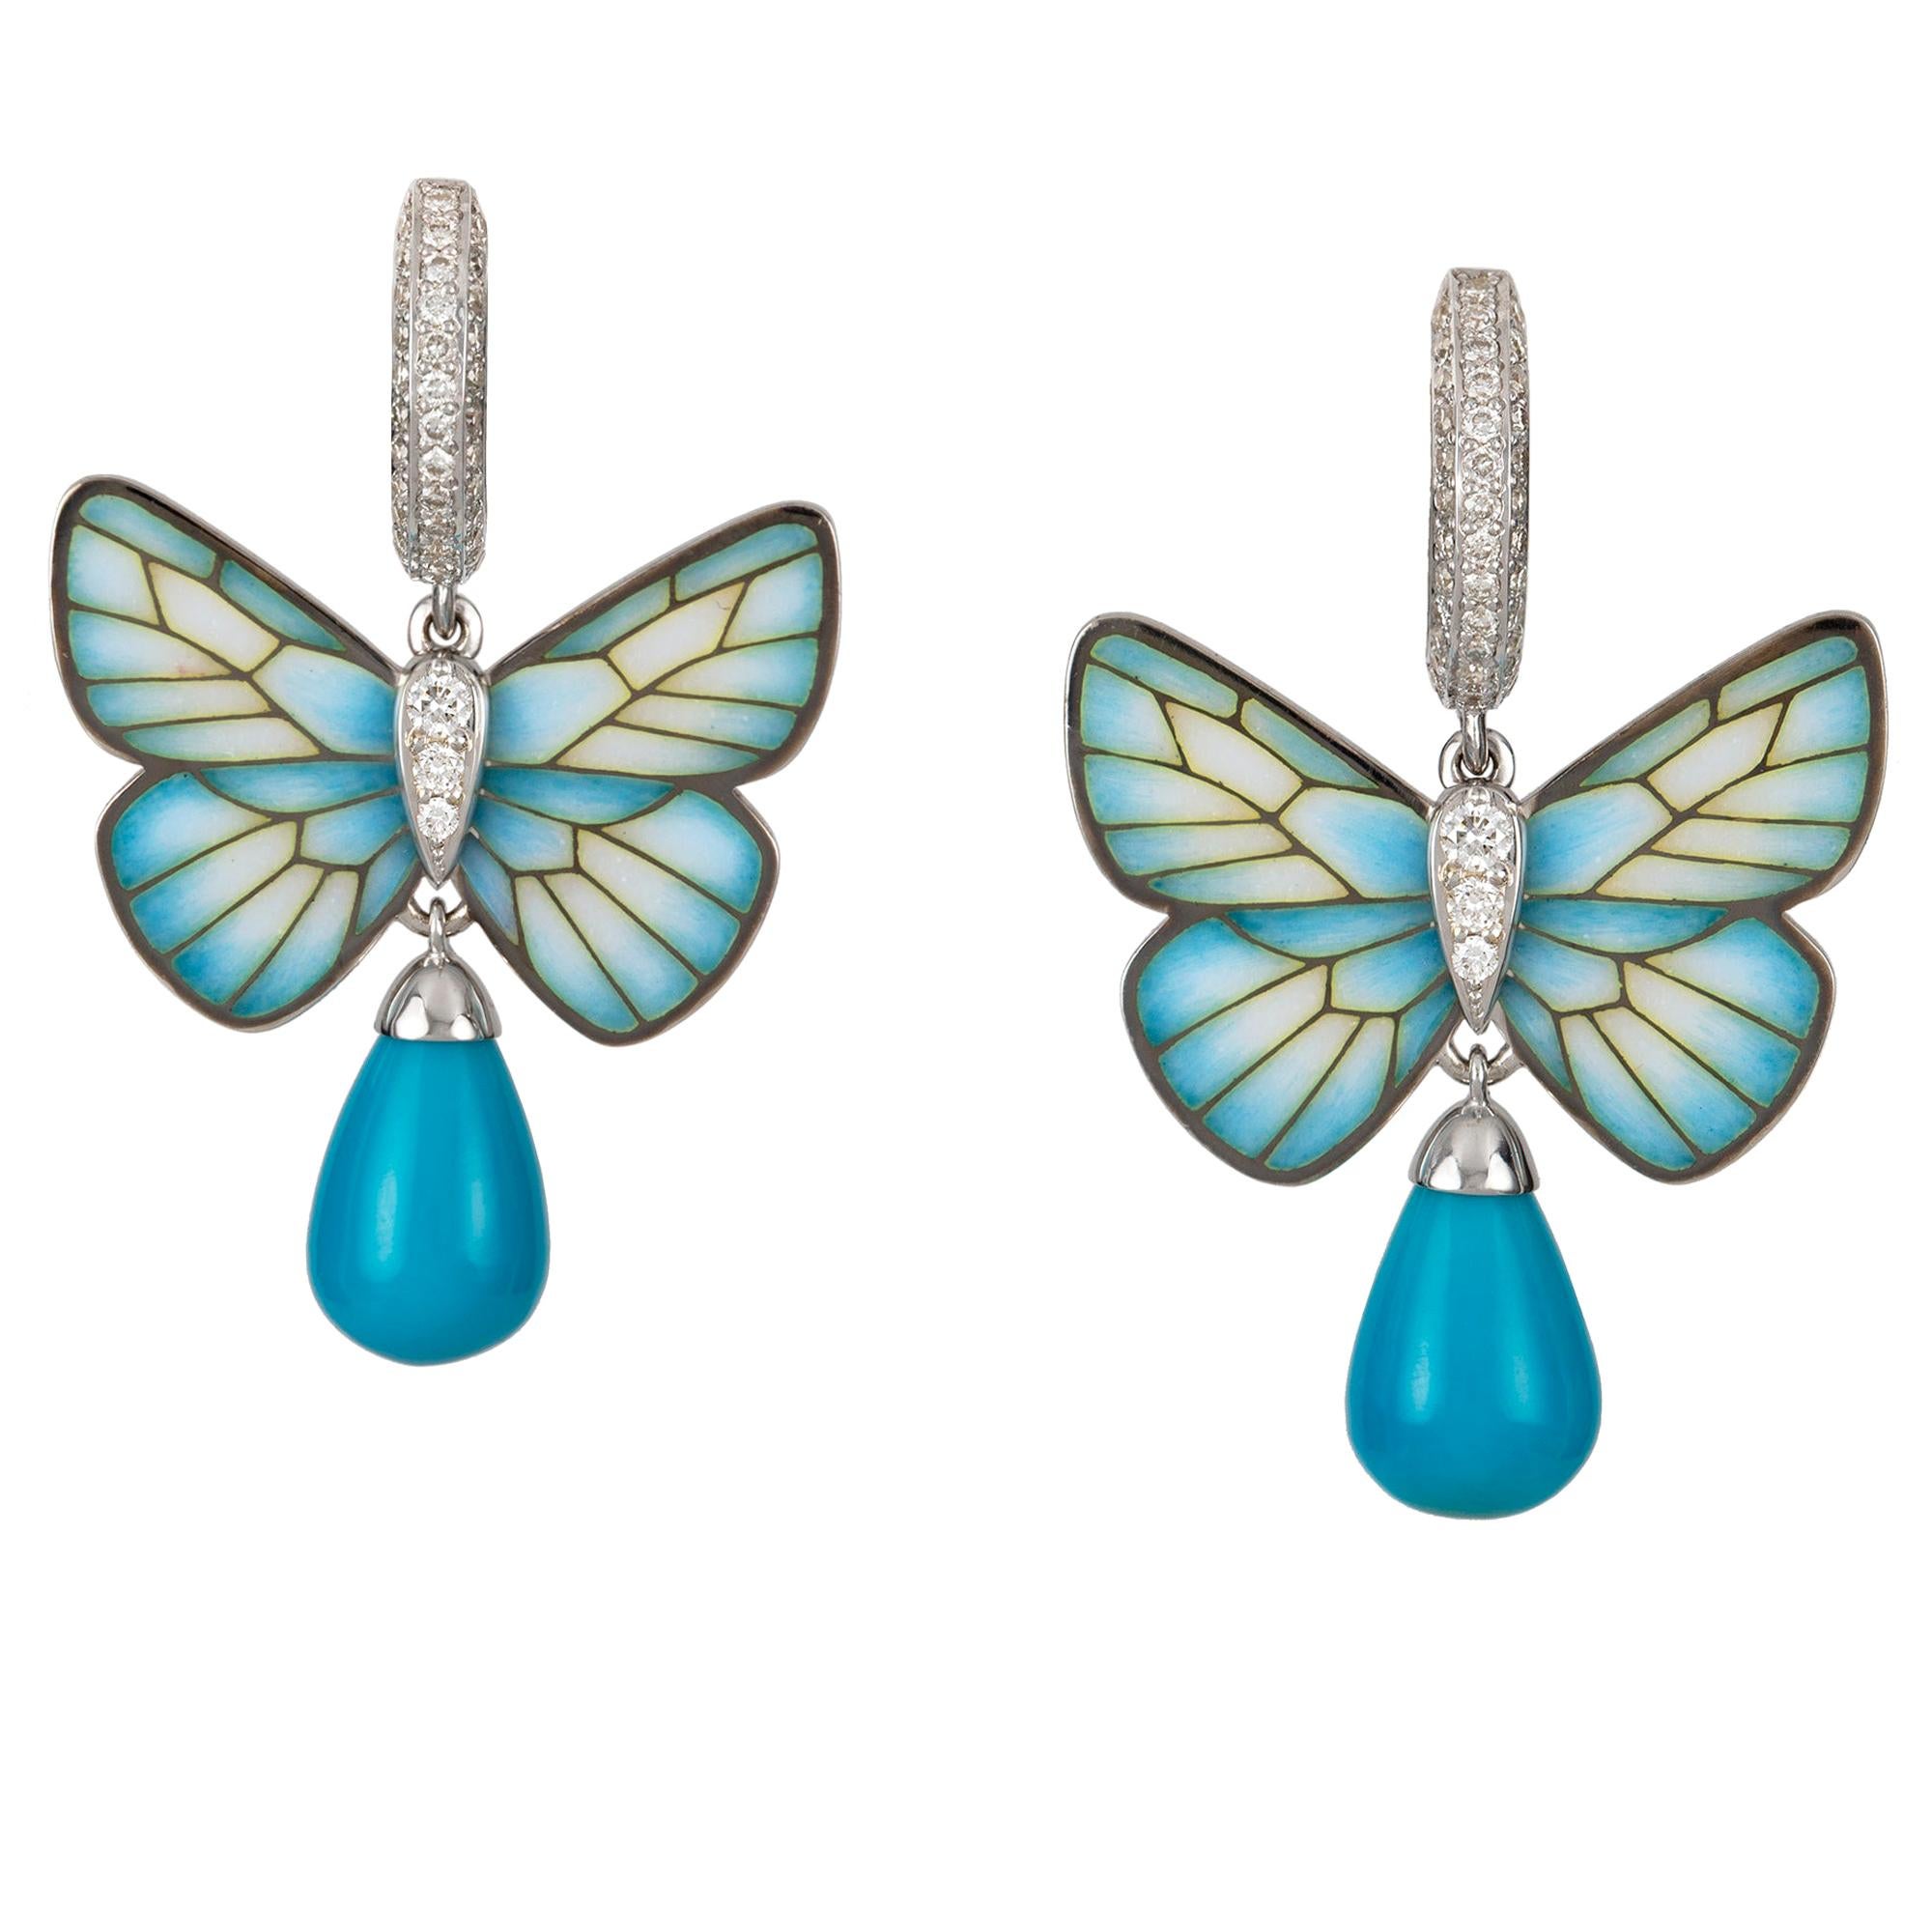 Pair of Turquoise Butterfly Earrings by Ilgiz F For Sale